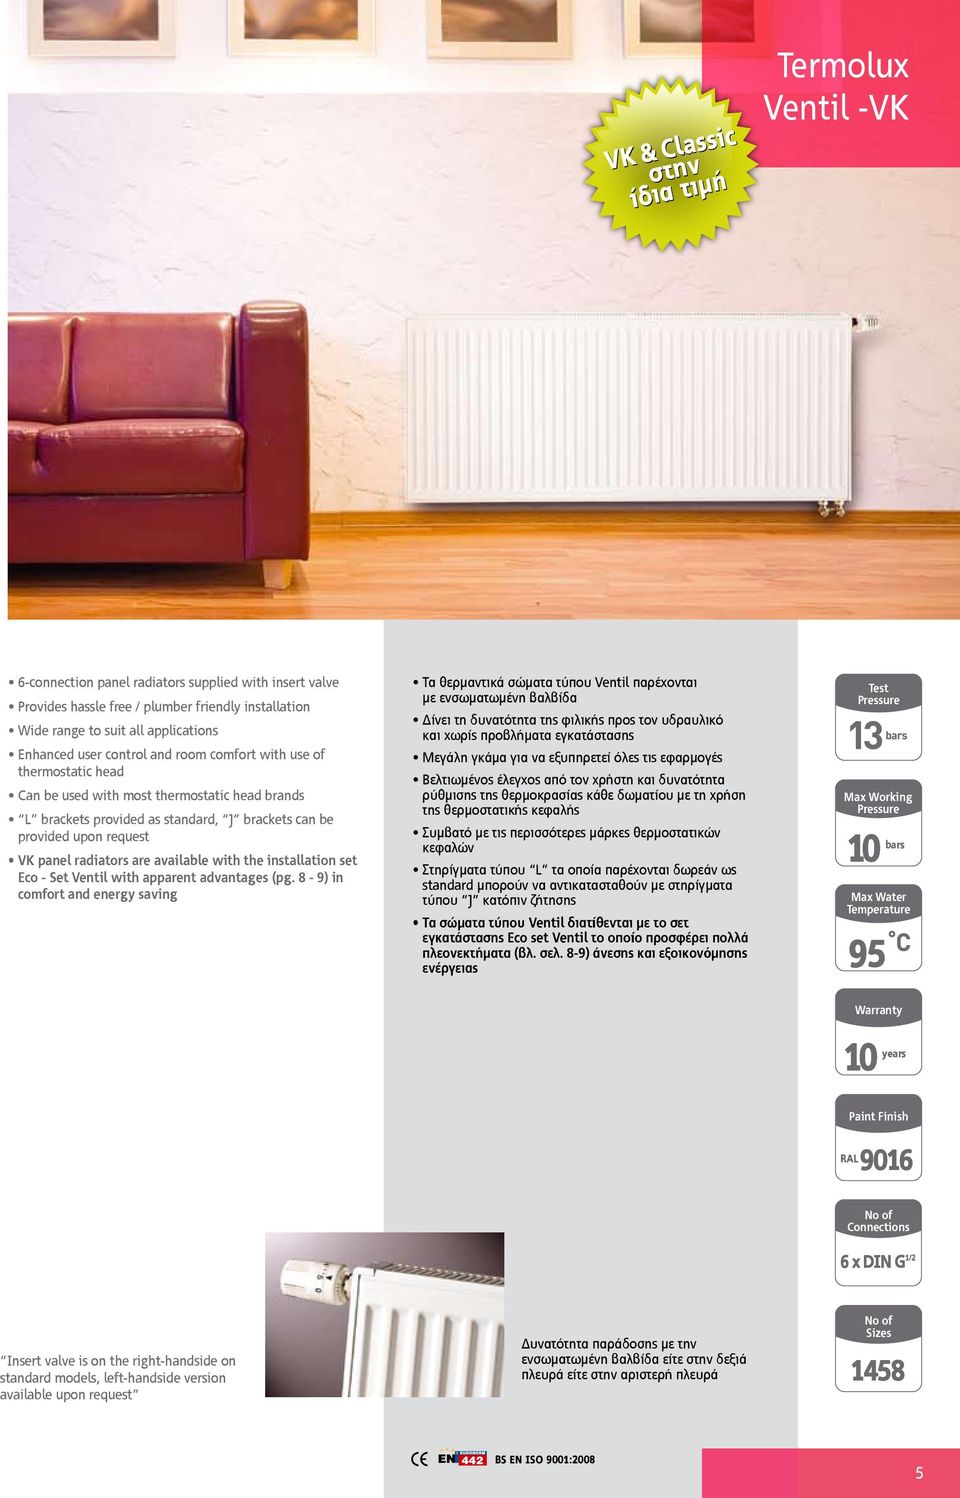 radiators are available with the installation set Eco - Set Ventil with apparent advantages (pg.